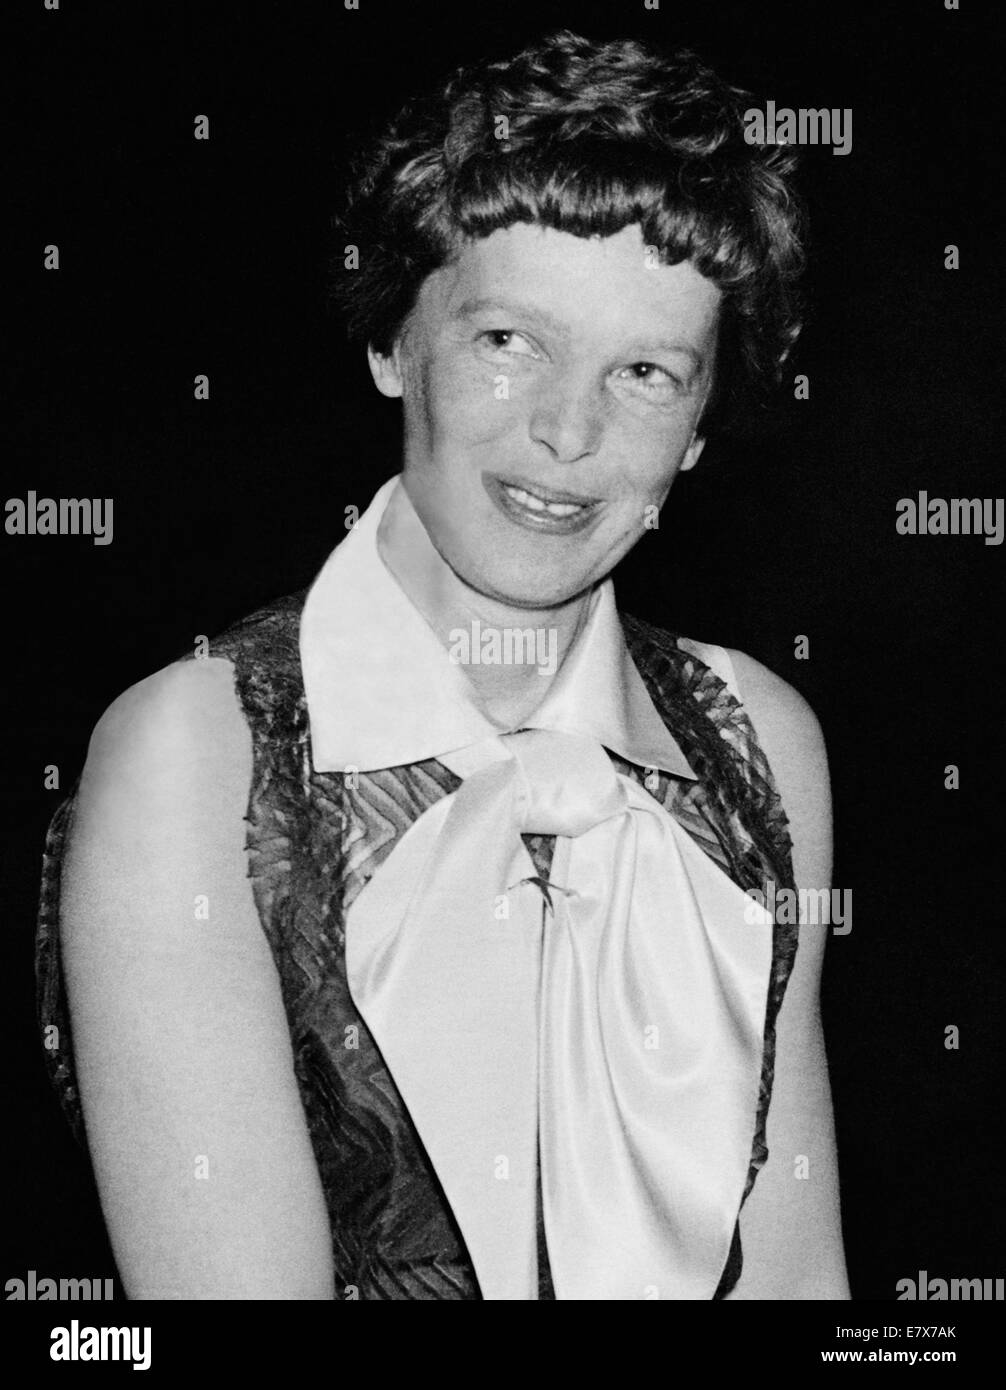 Vintage photo of American aviation pioneer and author Amelia Earhart (1897 – declared dead 1939) – Earhart and her navigator Fred Noonan famously vanished in 1937 while she was trying to become the first female to complete a circumnavigational flight of the globe. Photo by Harris & Ewing taken in 1935. Stock Photo